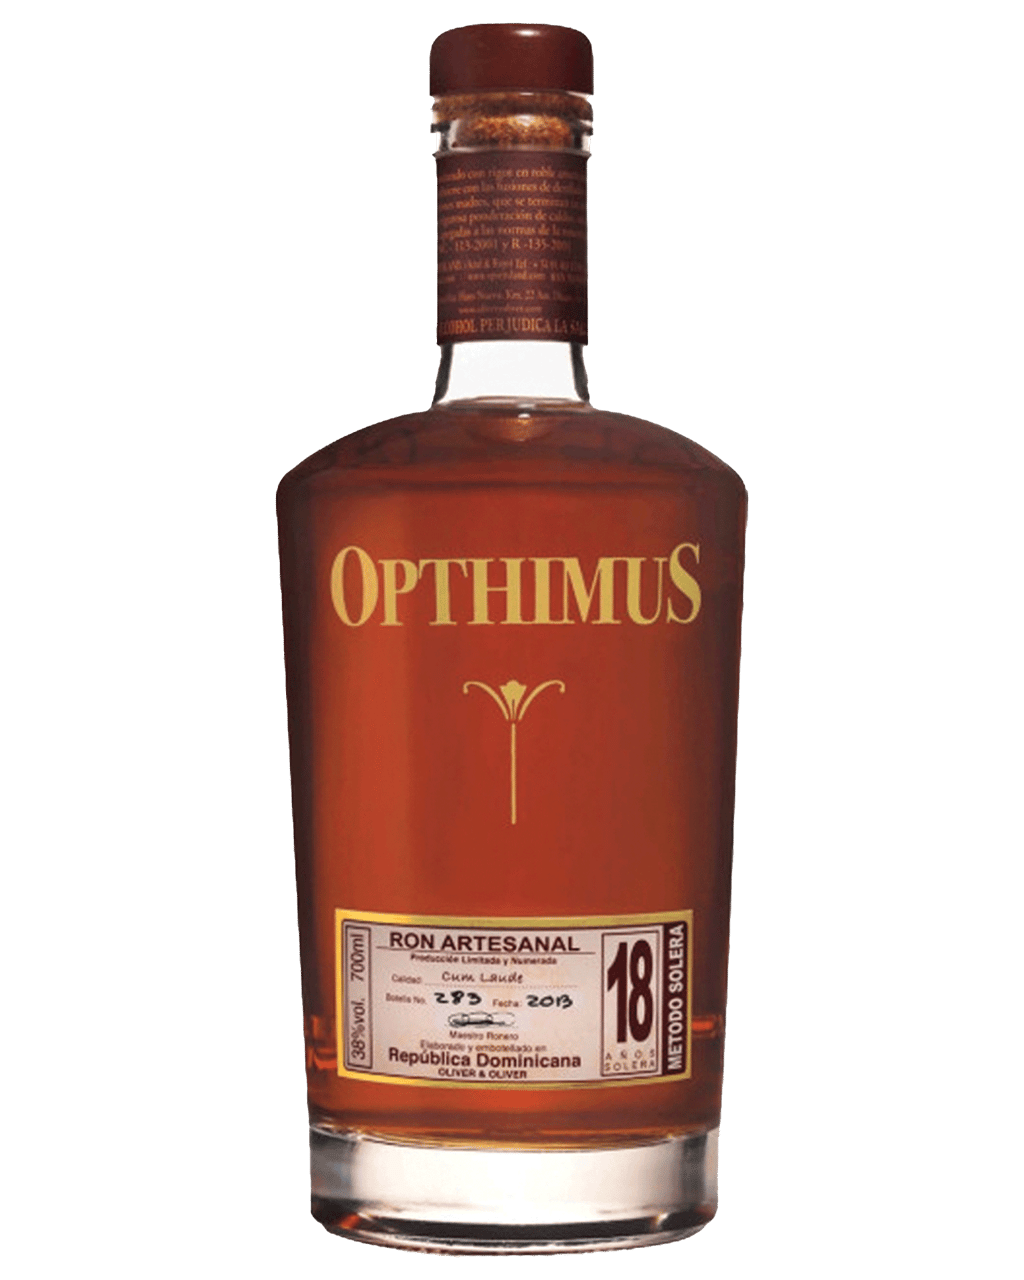 Opthimus 18 Year Old Rum 700ml Unbeatable Prices Buy Online Best Deals With Delivery Dan